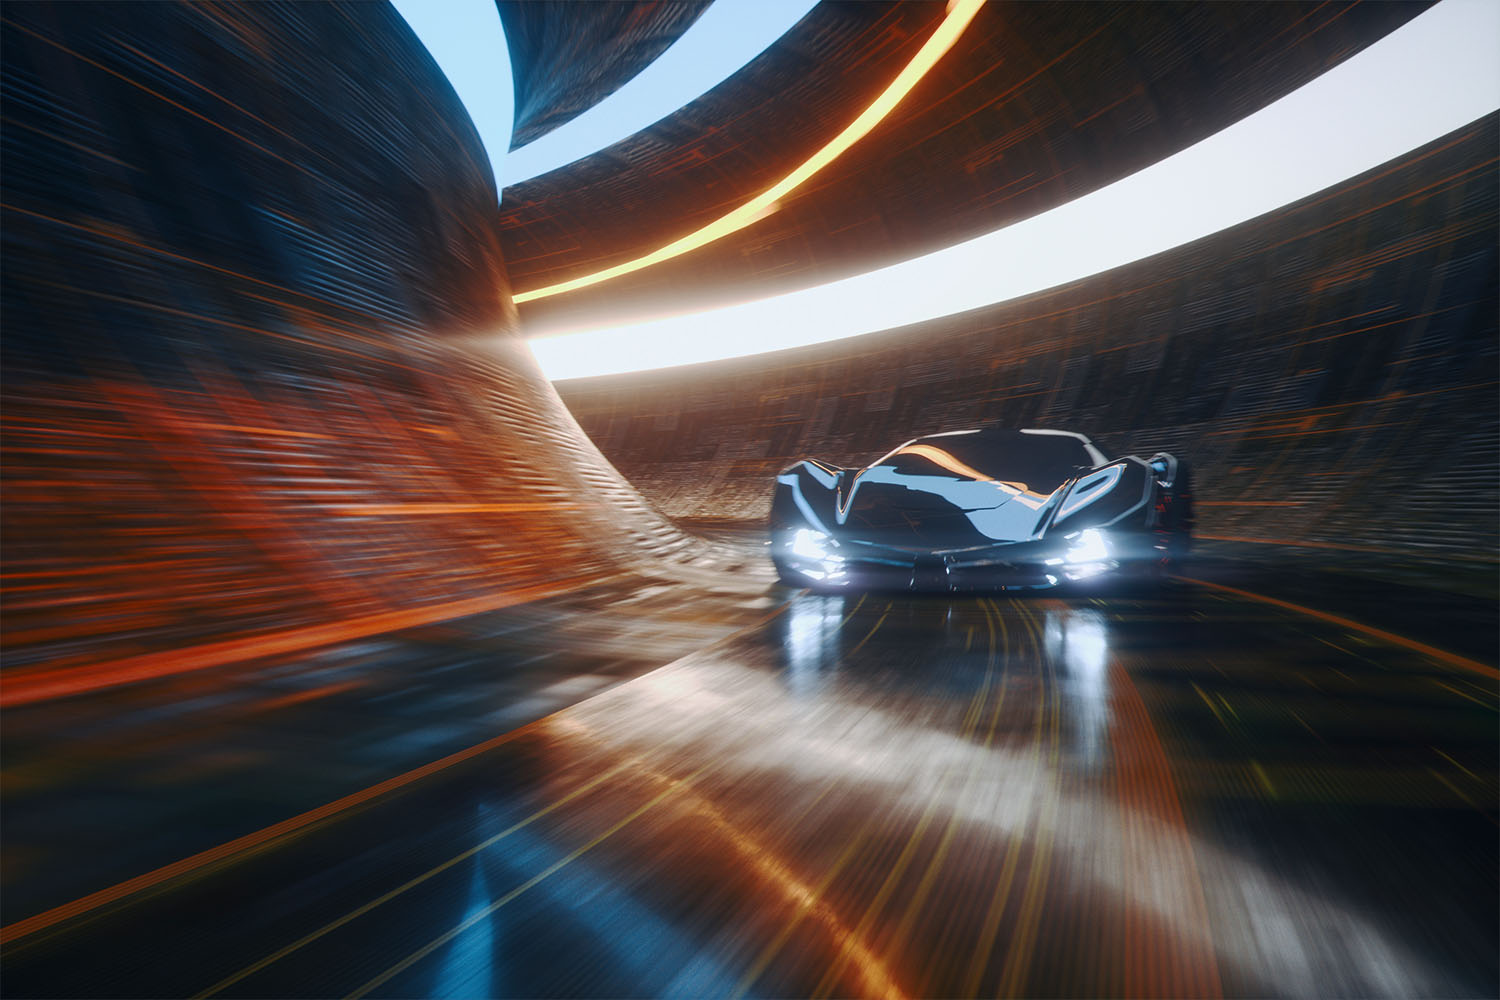 Futuristic looking fast car, blurry background suggests movement